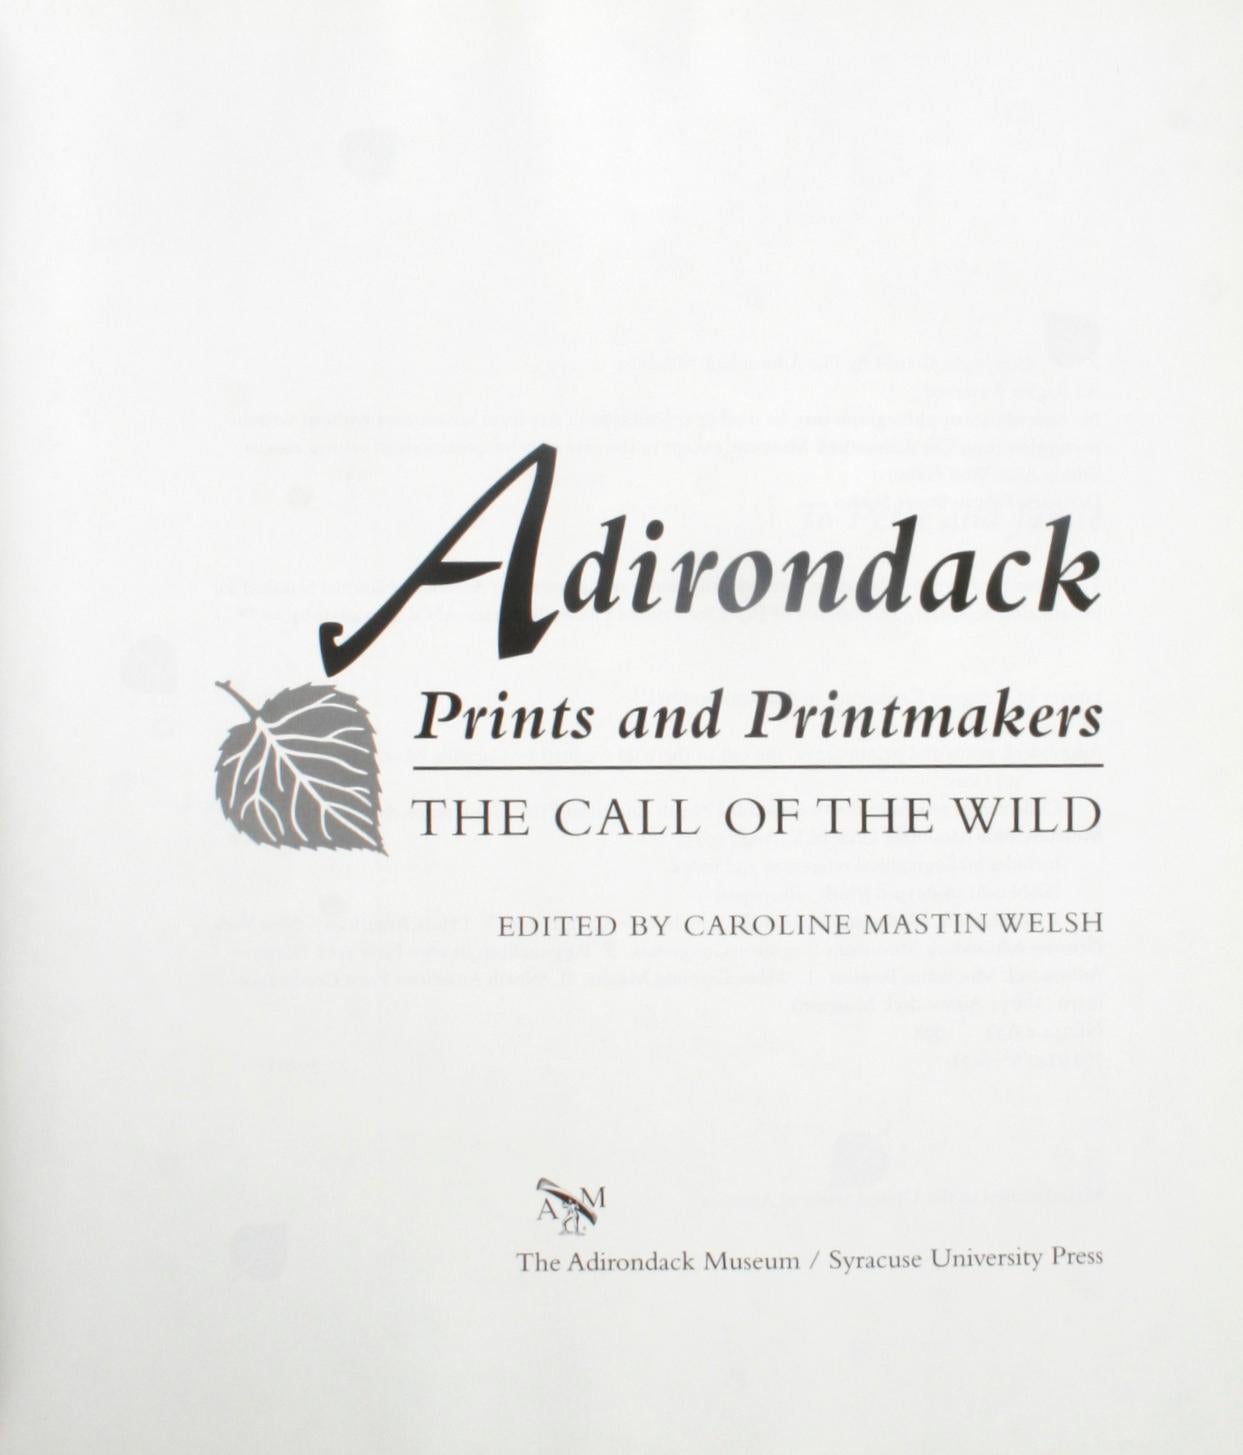 American Adirondack Prints and Printmakers, The Call of the Wild, 1st Edition